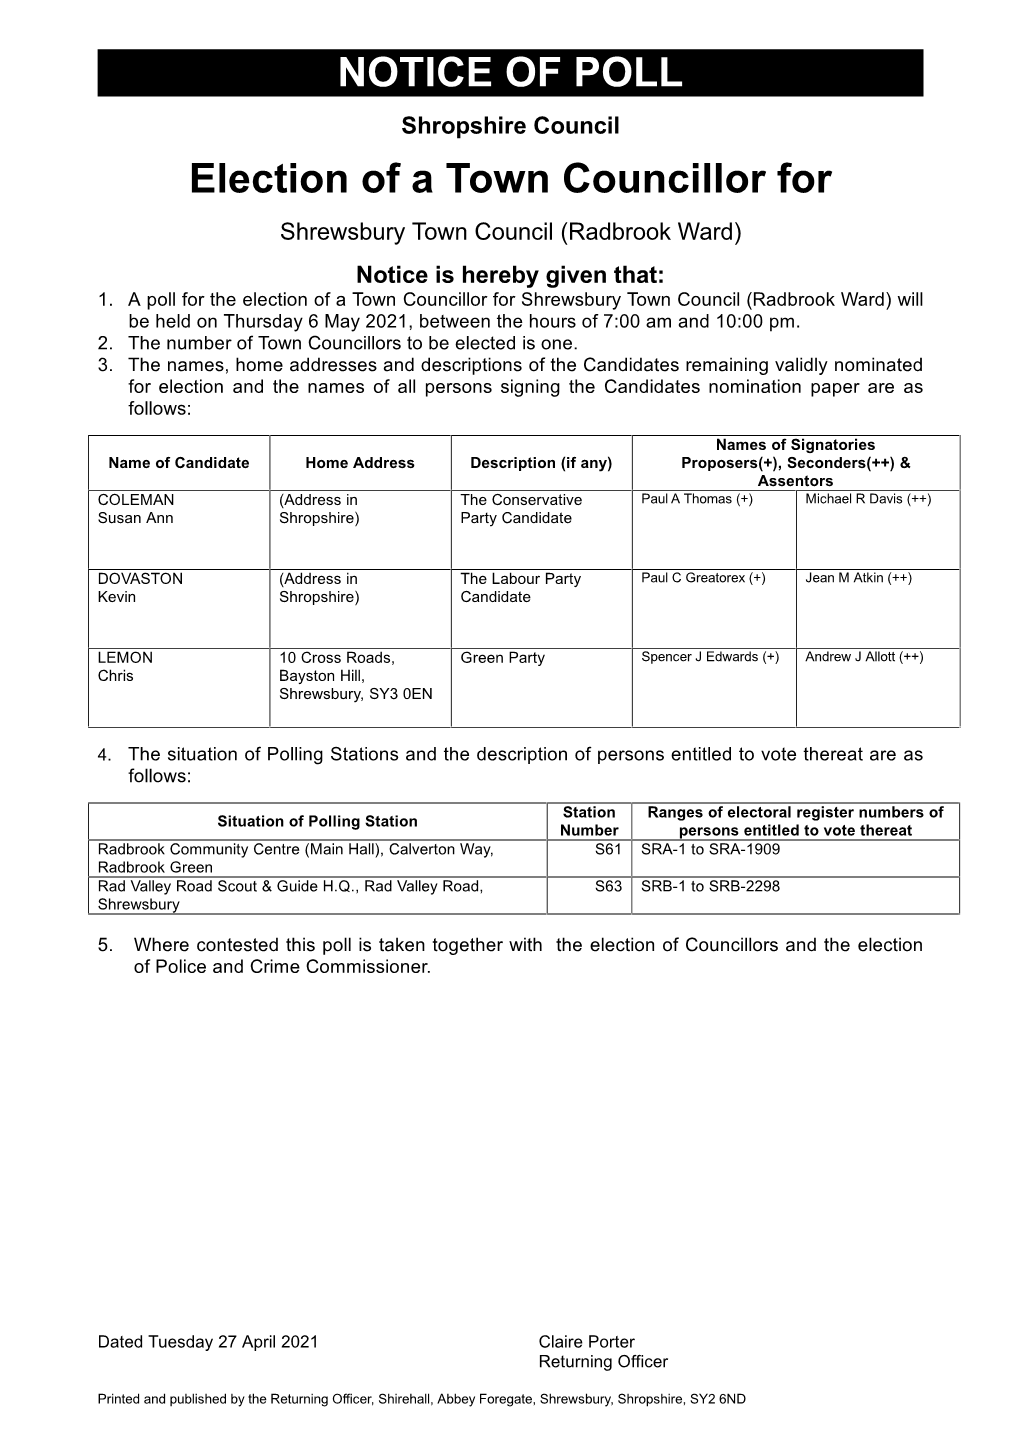 NOTICE of POLL Election of a Town Councillor